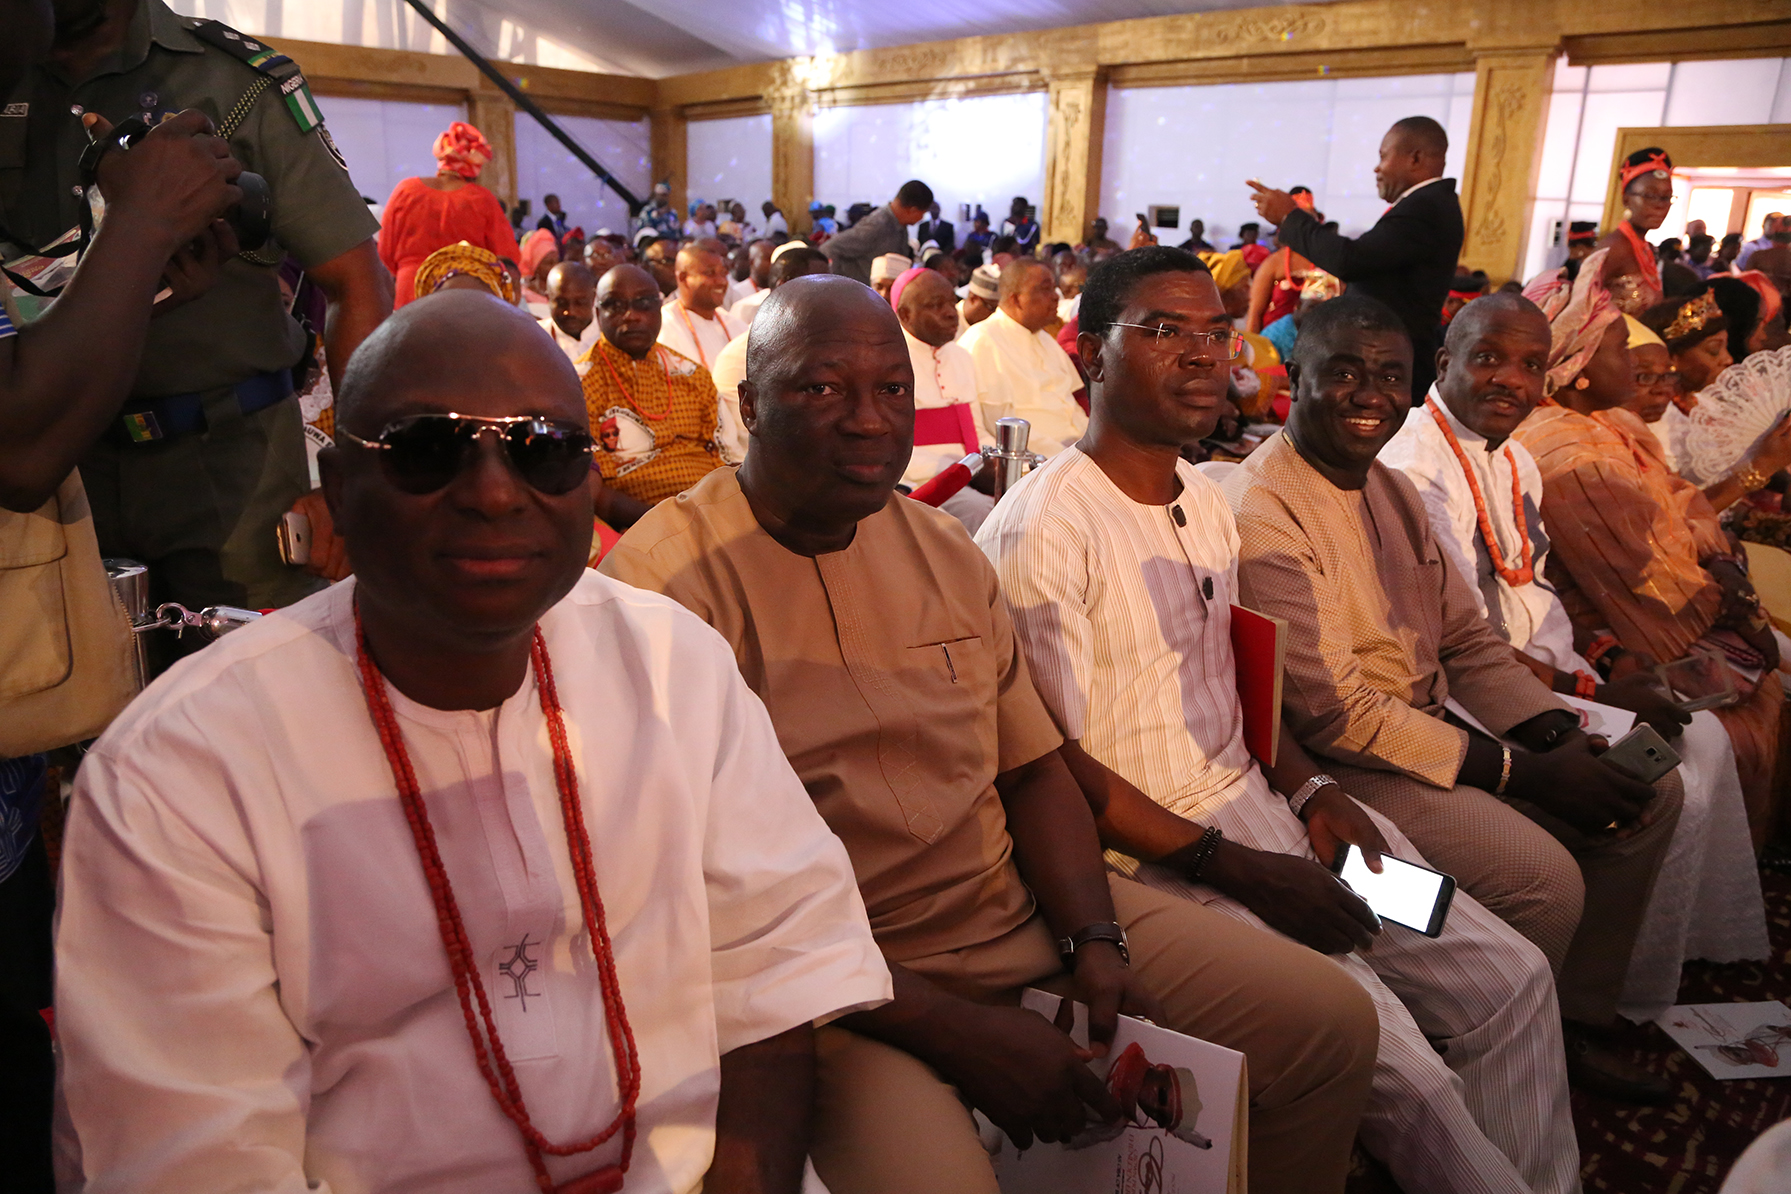 Some Commissioners in the Edo State Executive Council  at the coronation of His Royal Majesty, Omo n'Oba n'Edo Uku Akpolokpolo, Ewuare II, Oba of Benin, on Thursday.